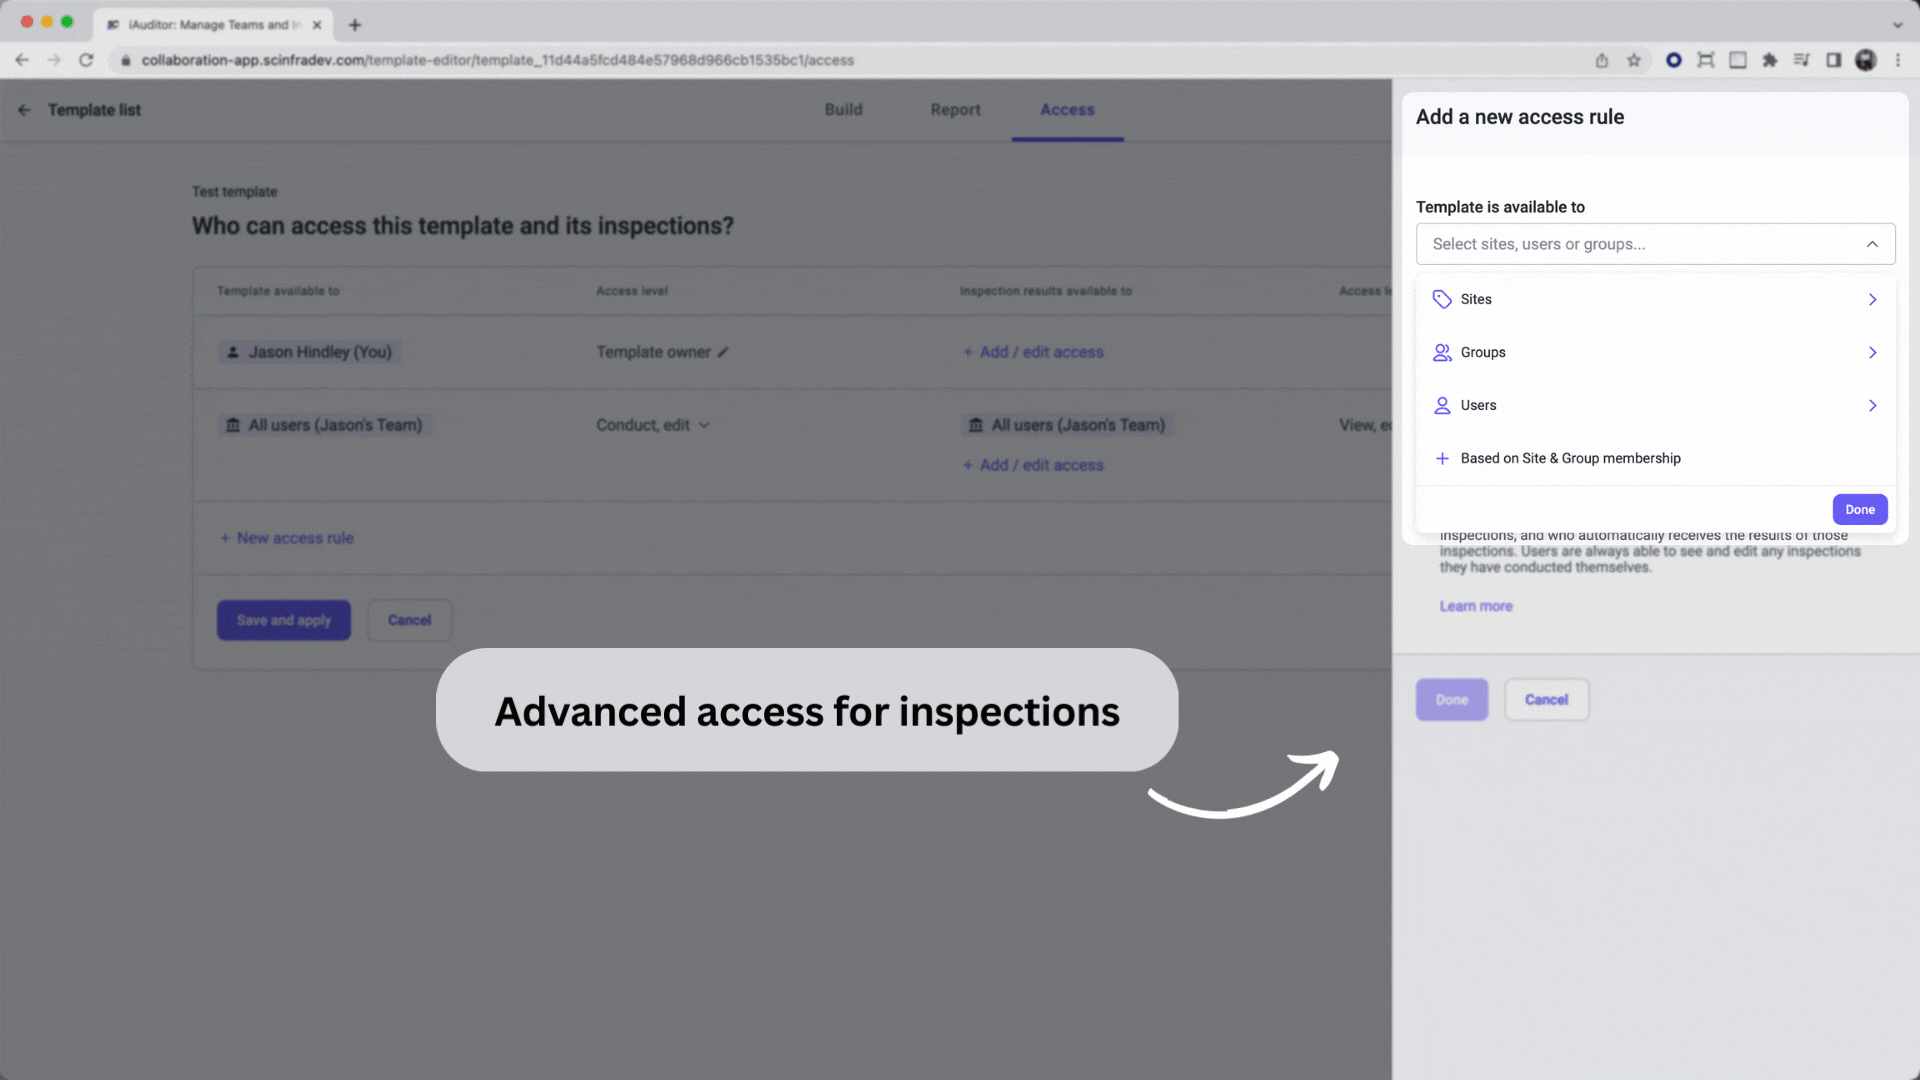 Ensure the right people can access the templates and inspections they need